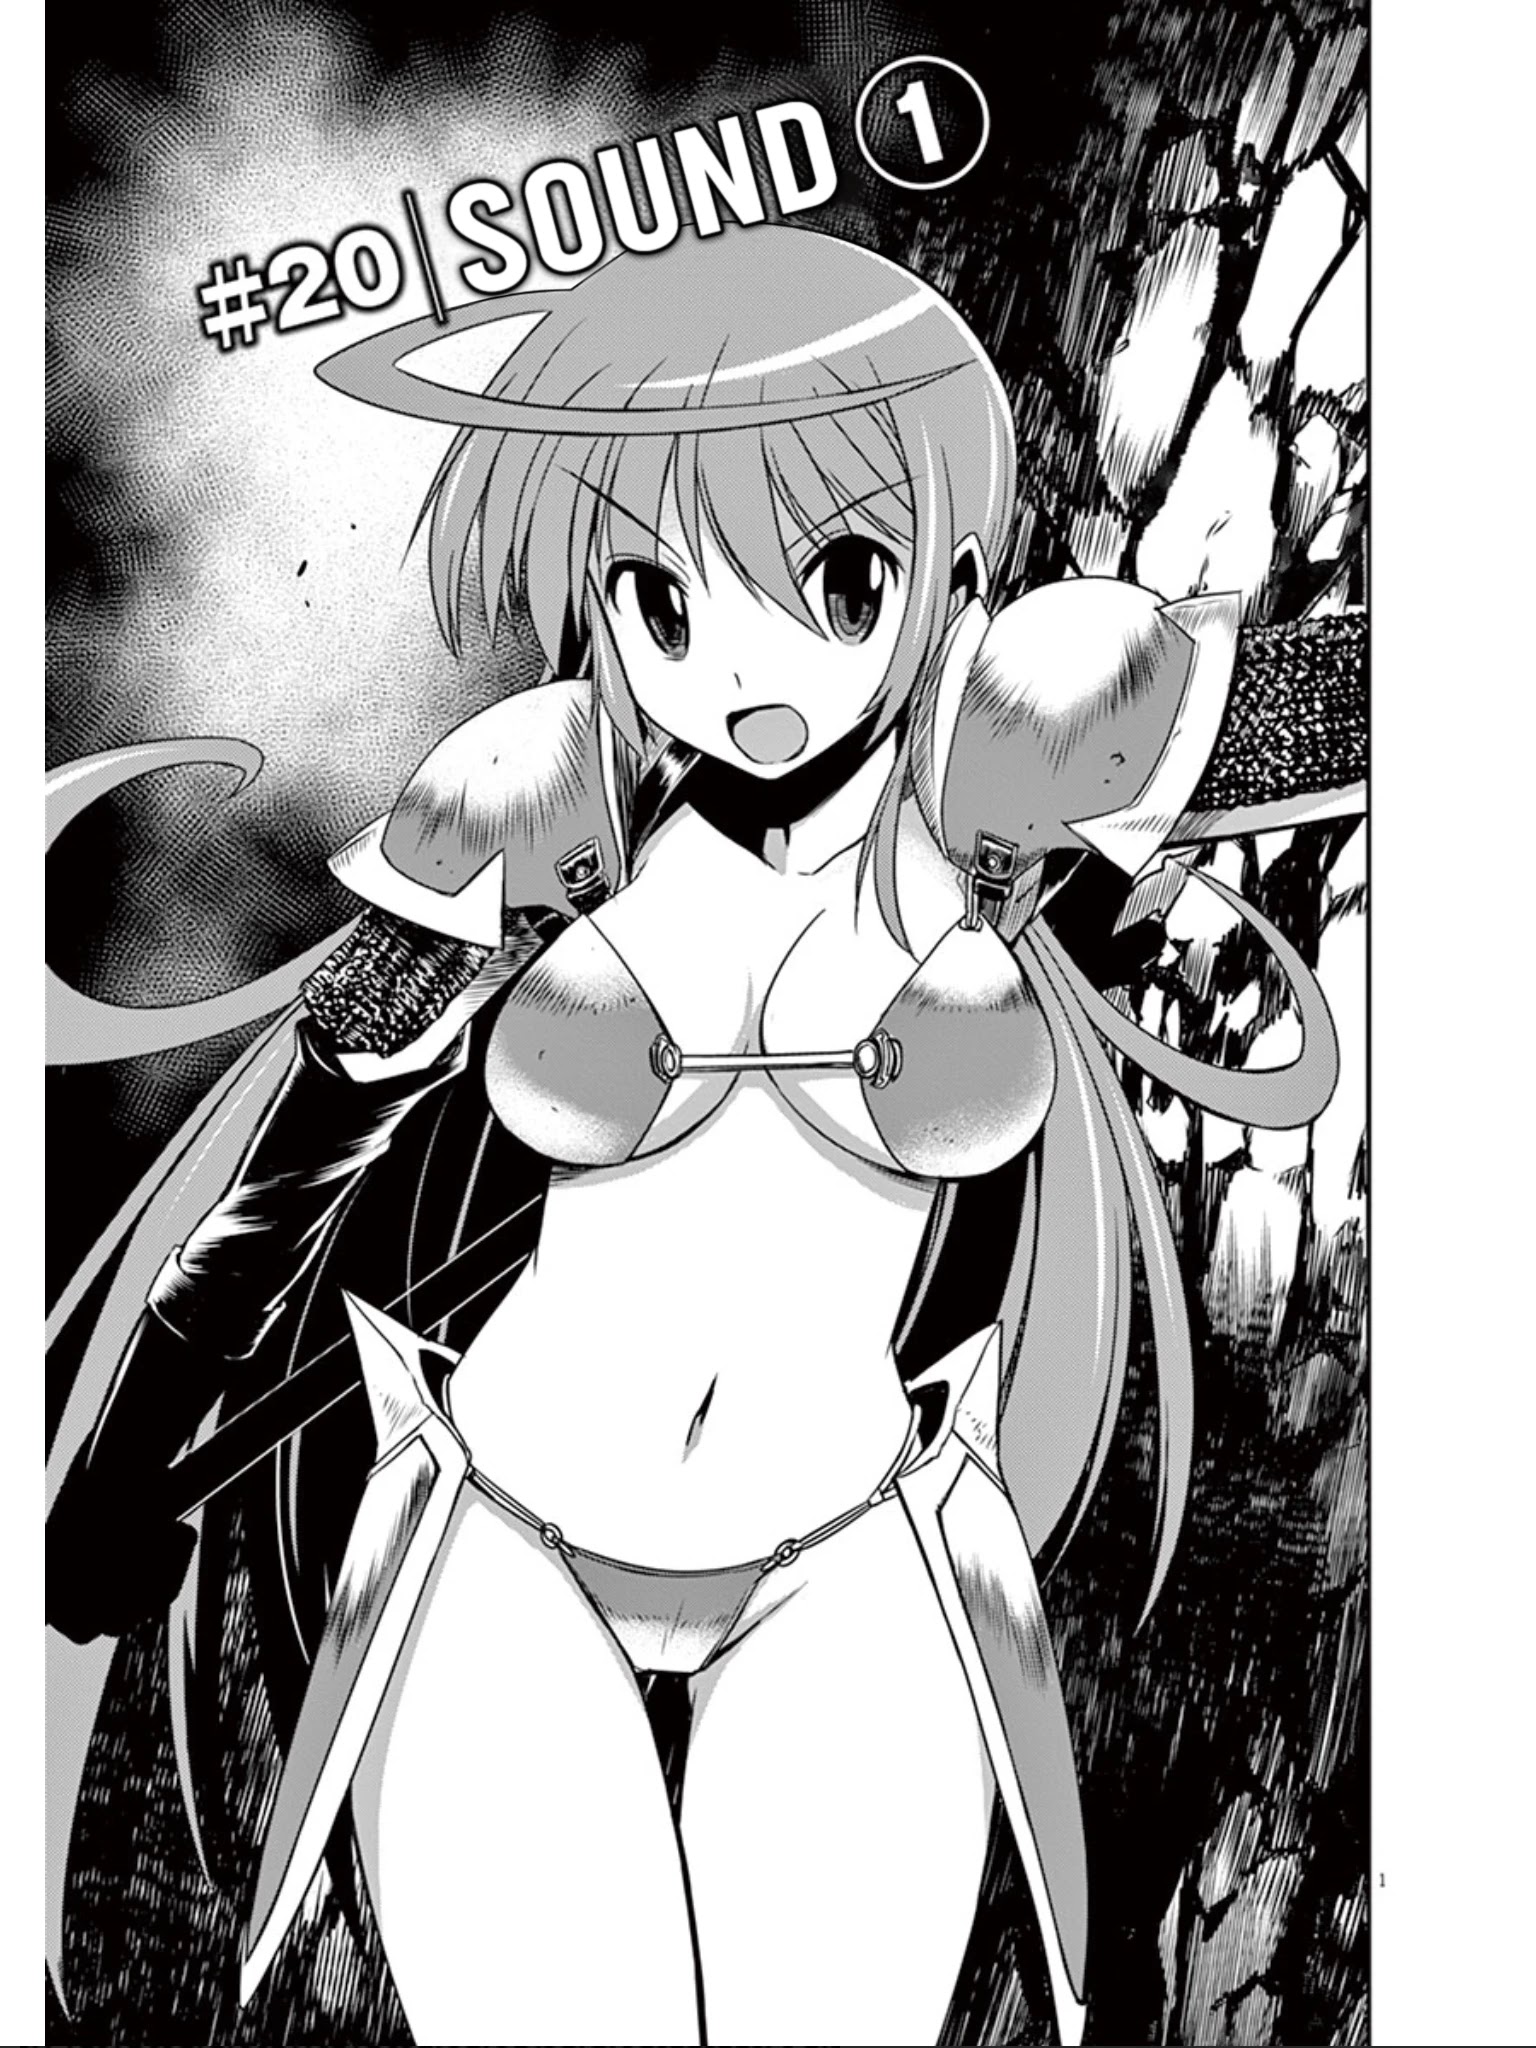 Eroge No Taiyou Chapter 20: Sound (1) - Picture 2